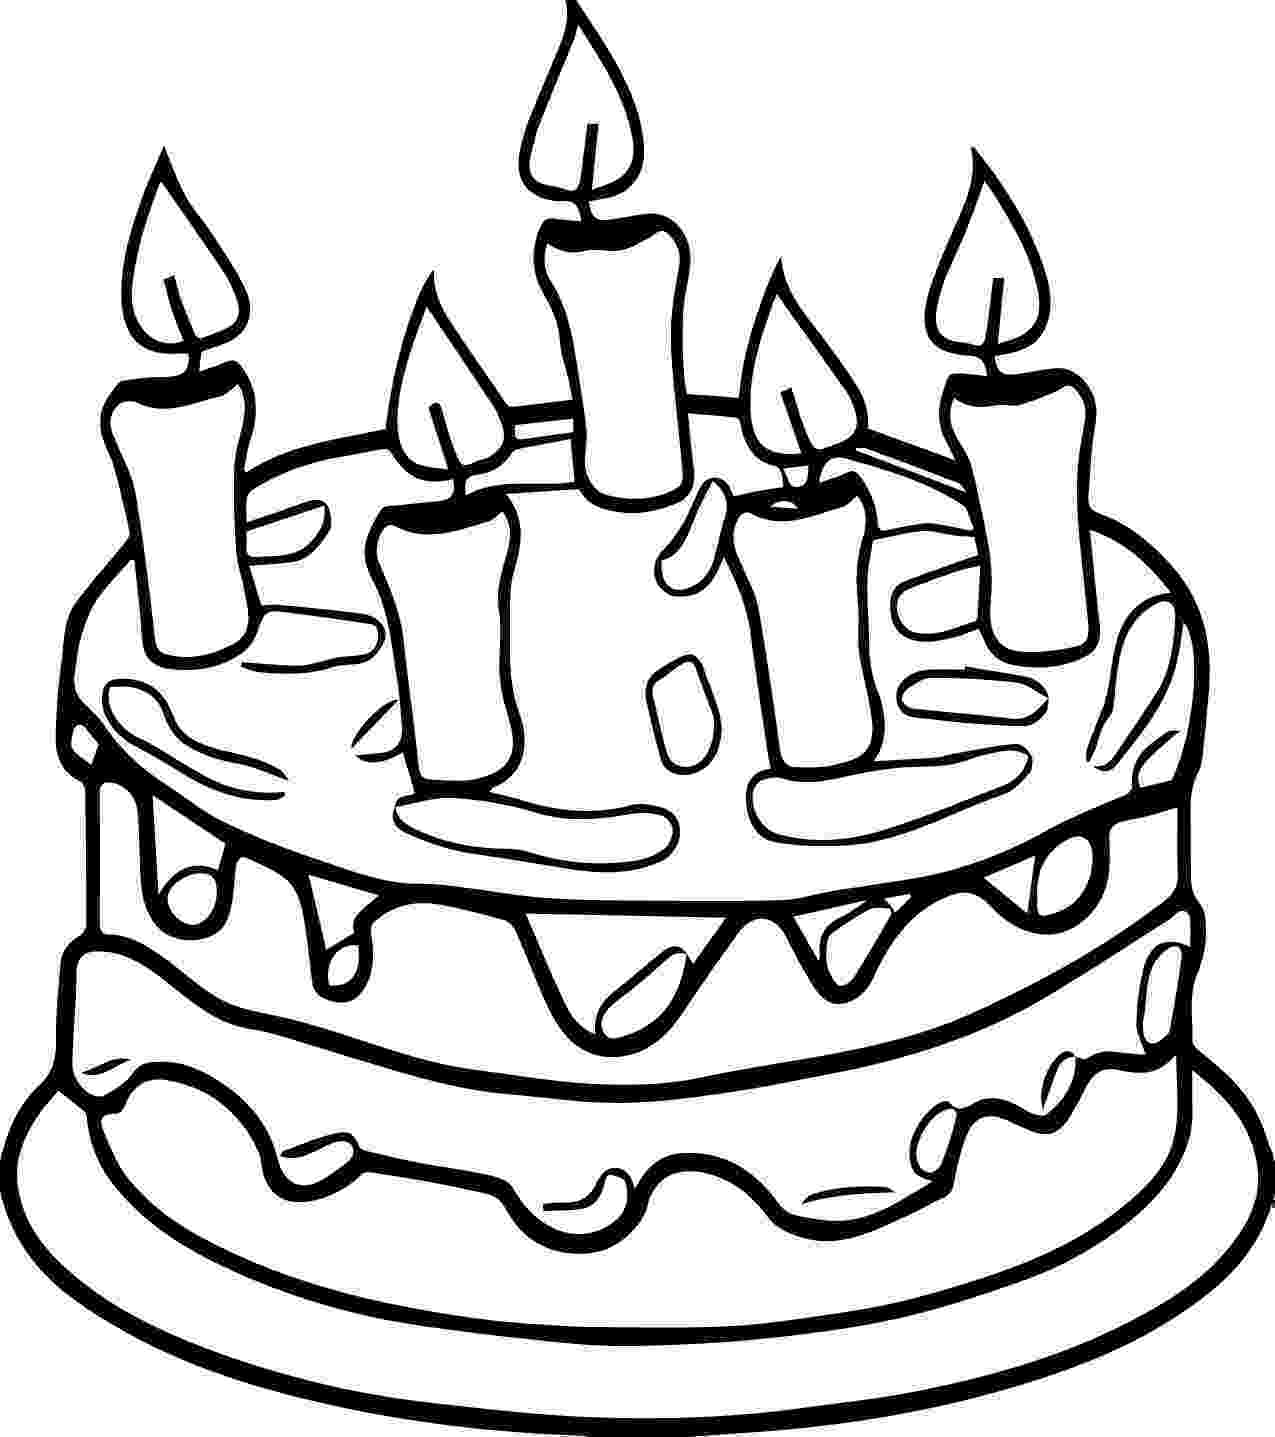 cake coloring page cake coloring page coloring home page coloring cake 